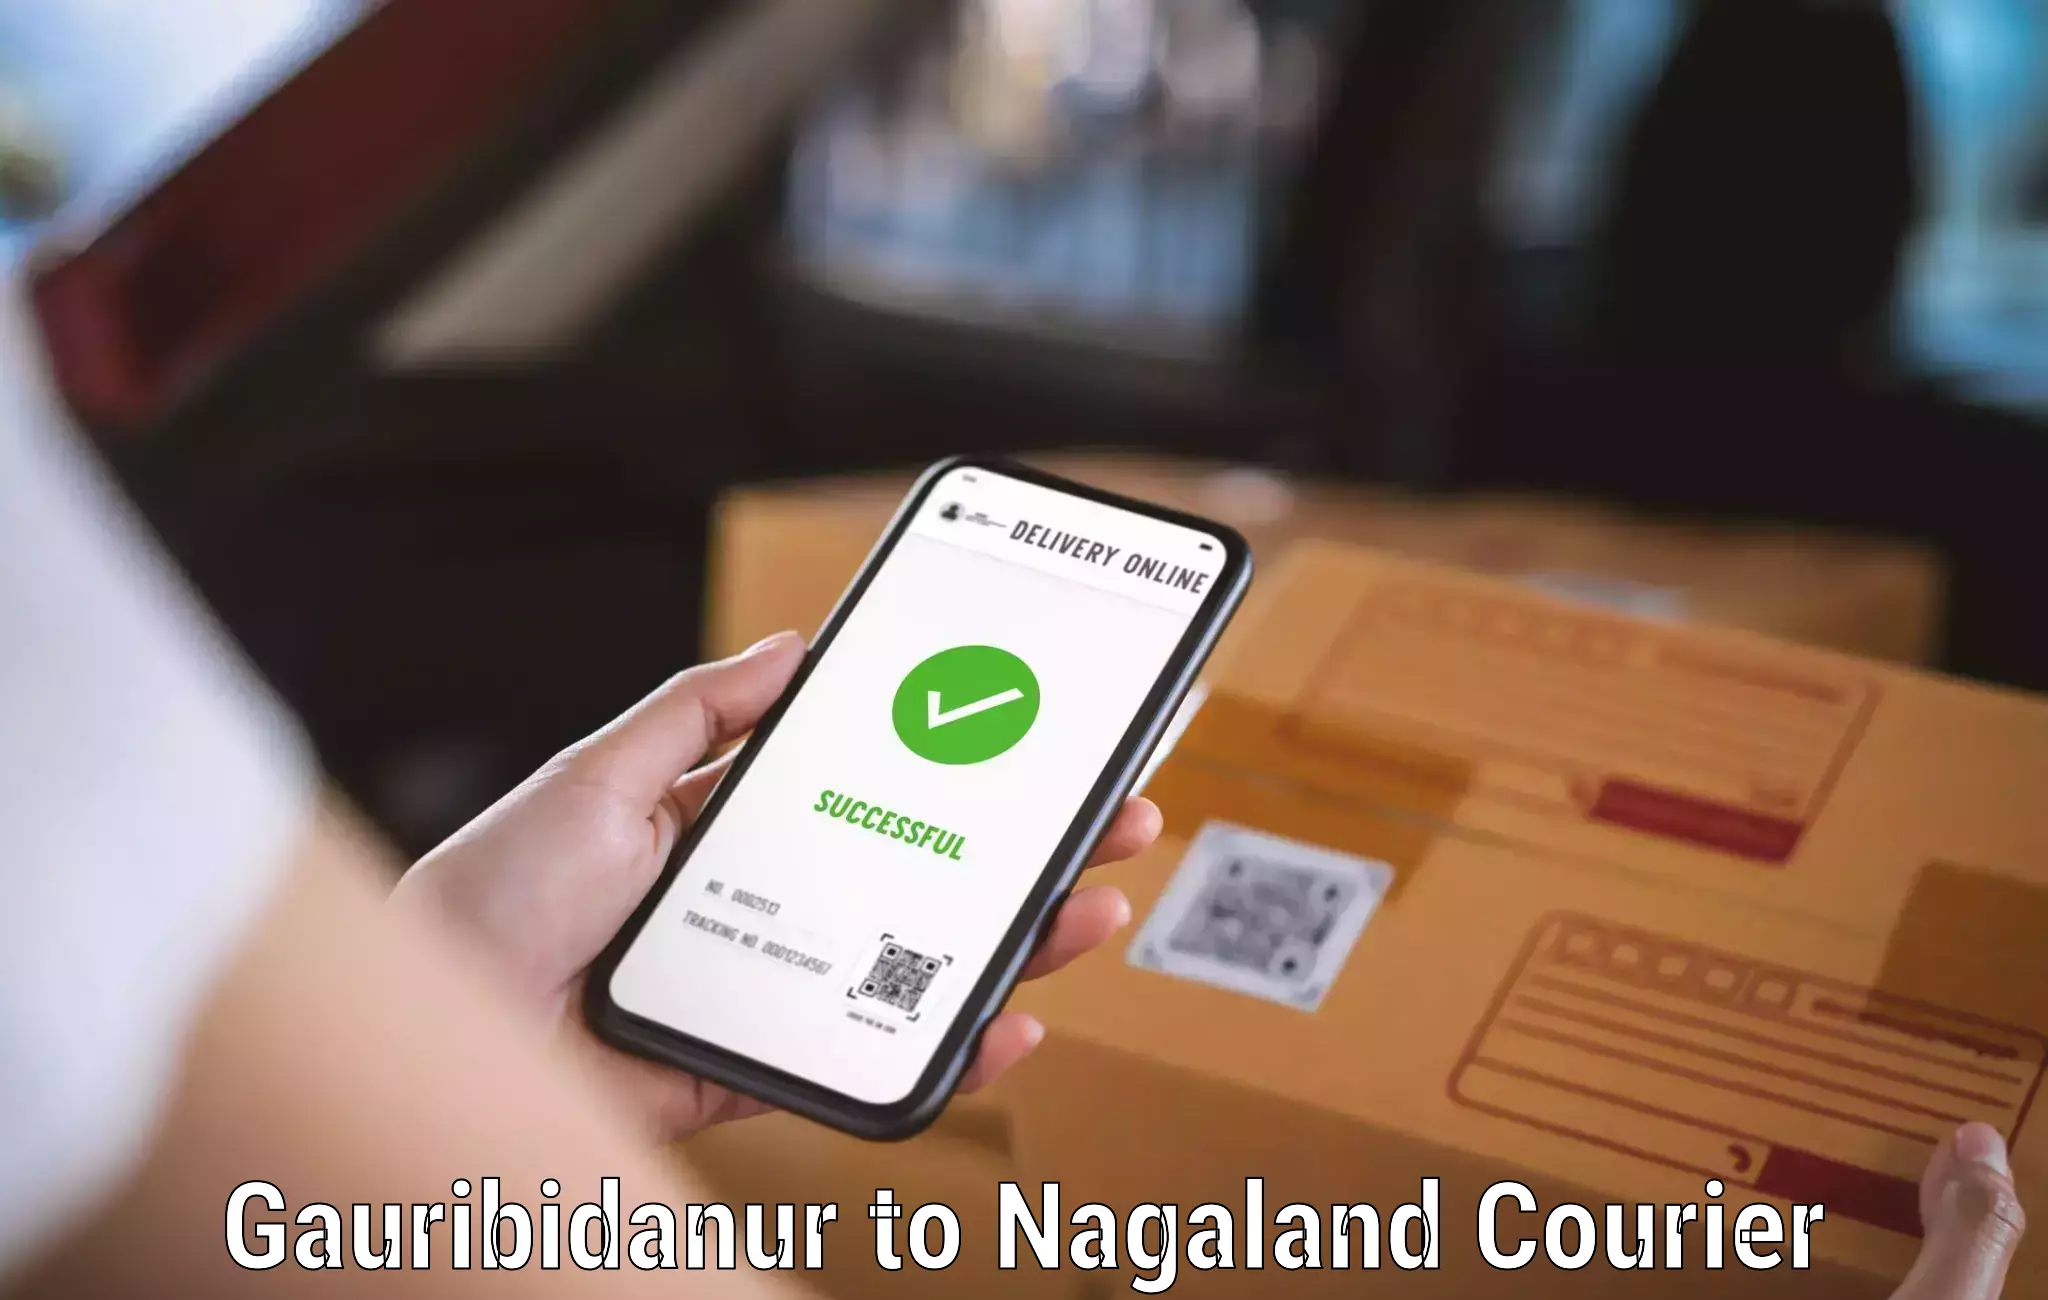 Express package services Gauribidanur to NIT Nagaland